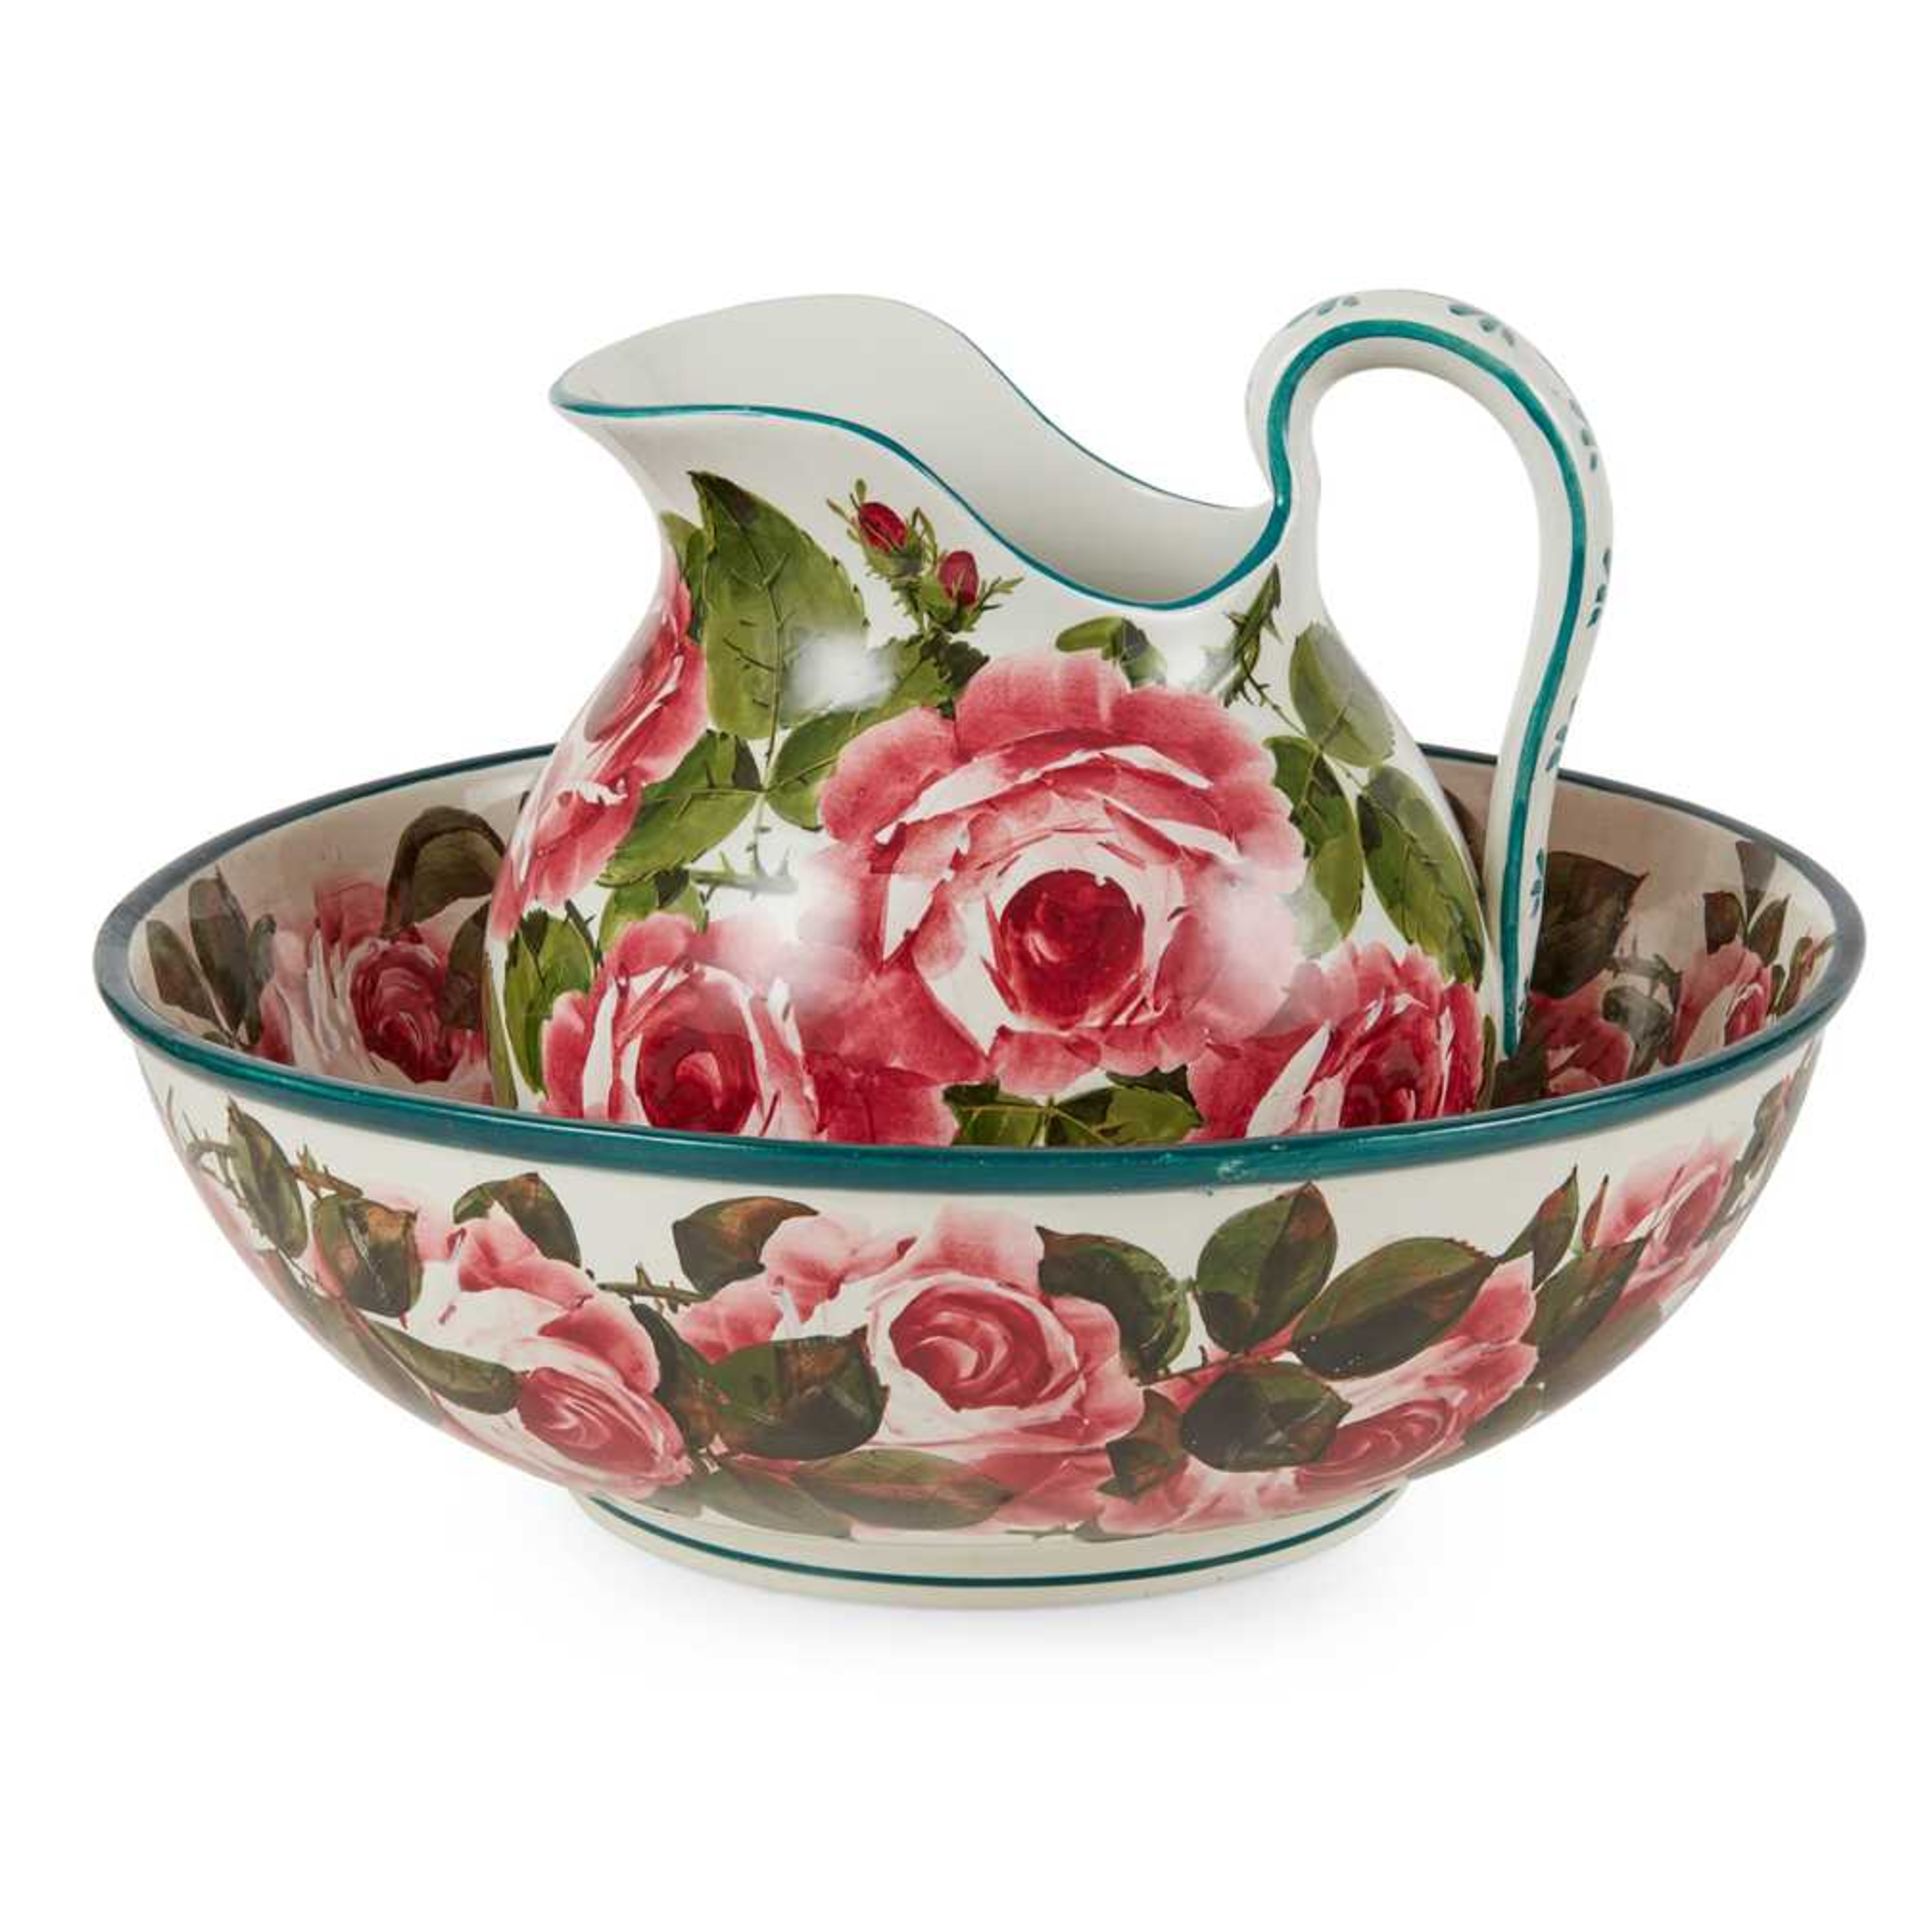 A WEMYSS WARE EWER AND MATCHED BASIN 'CABBAGE ROSES' PATTERN, CIRCA 1900